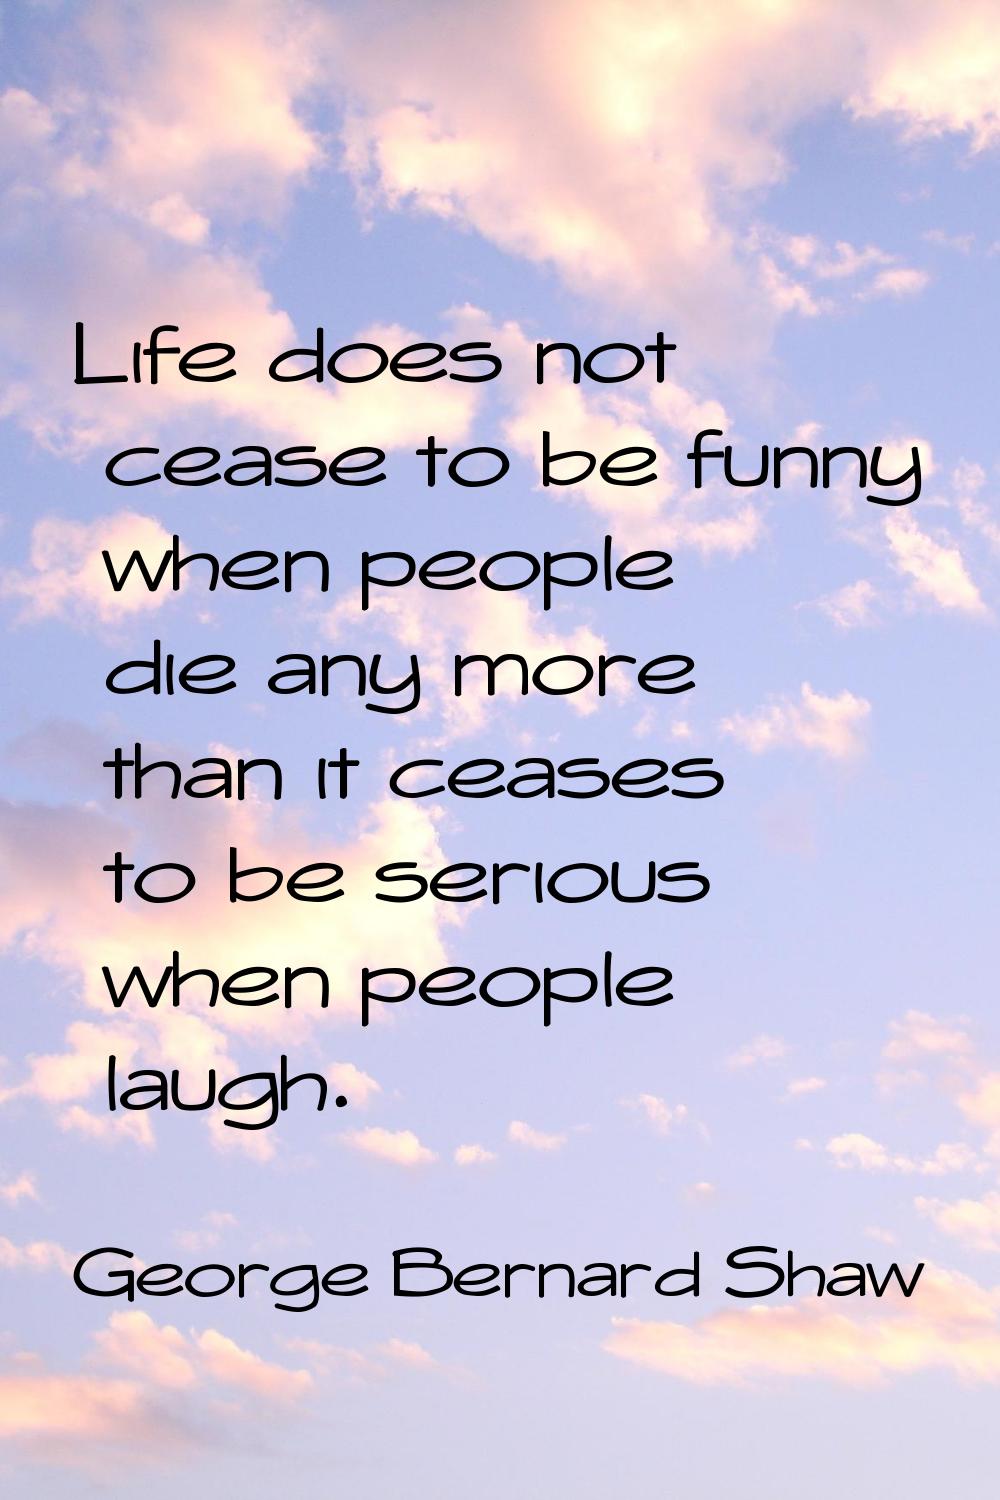 Life does not cease to be funny when people die any more than it ceases to be serious when people l